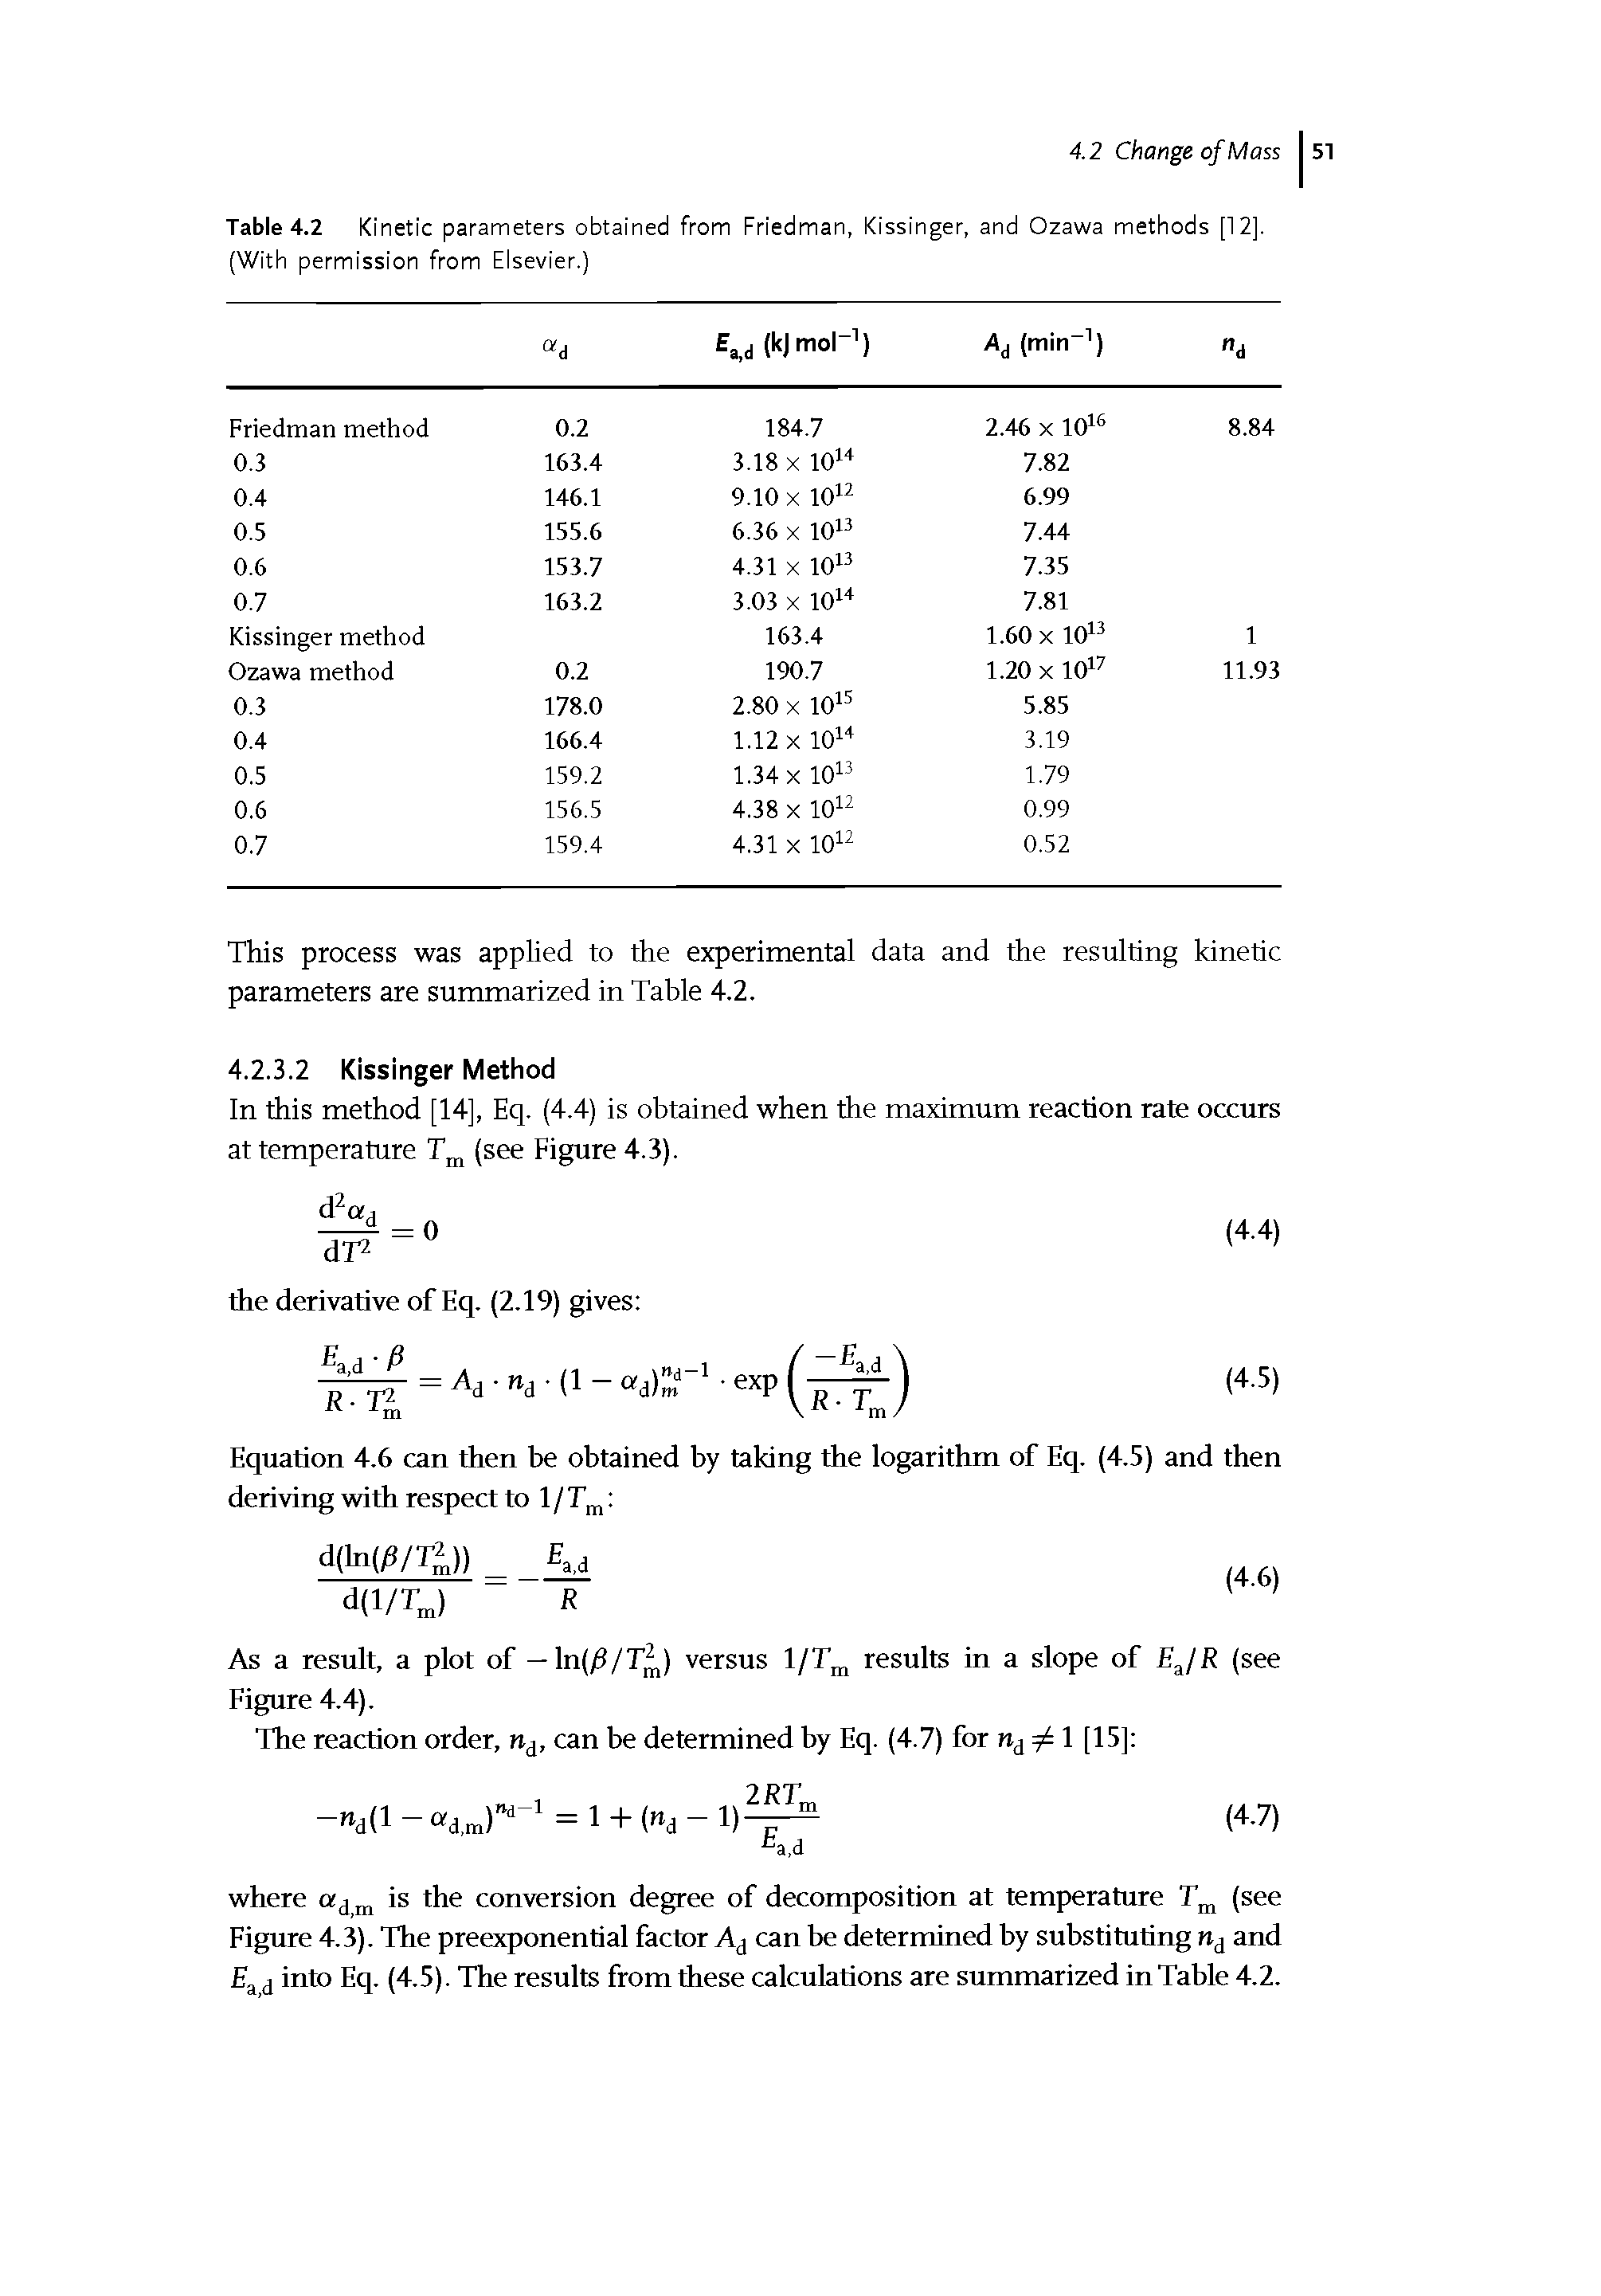 Table 4.2 Kinetic parameters obtained from Friedman, Kissinger, and Ozawa methods [12].